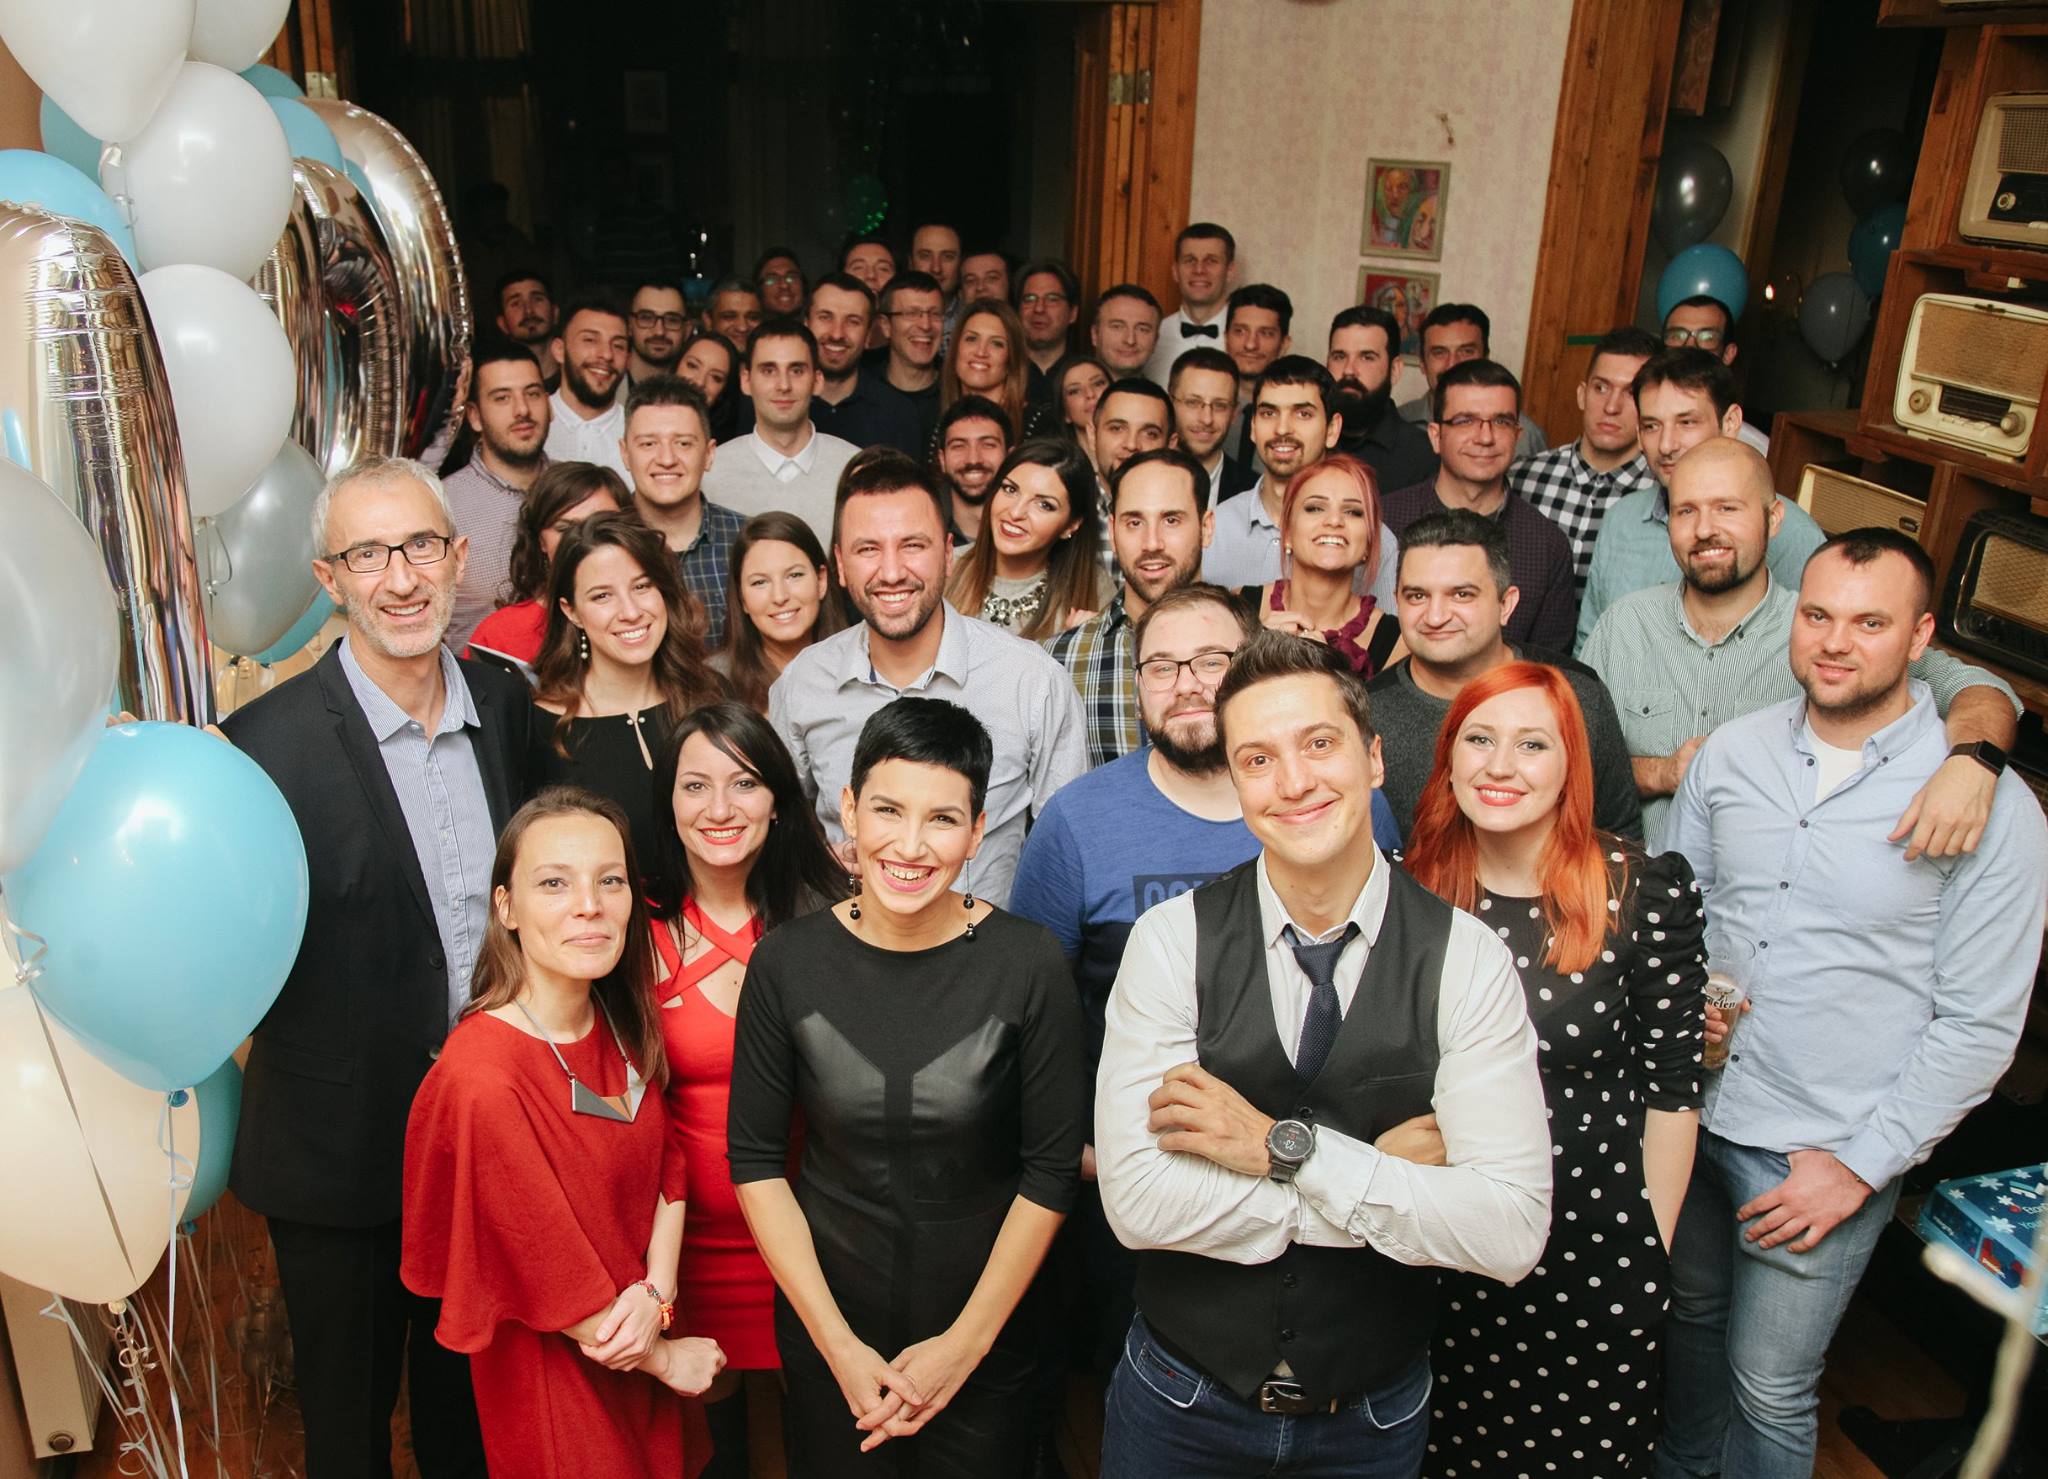 Eton Digital In Serbia Is Turning 10. How did our journey start?